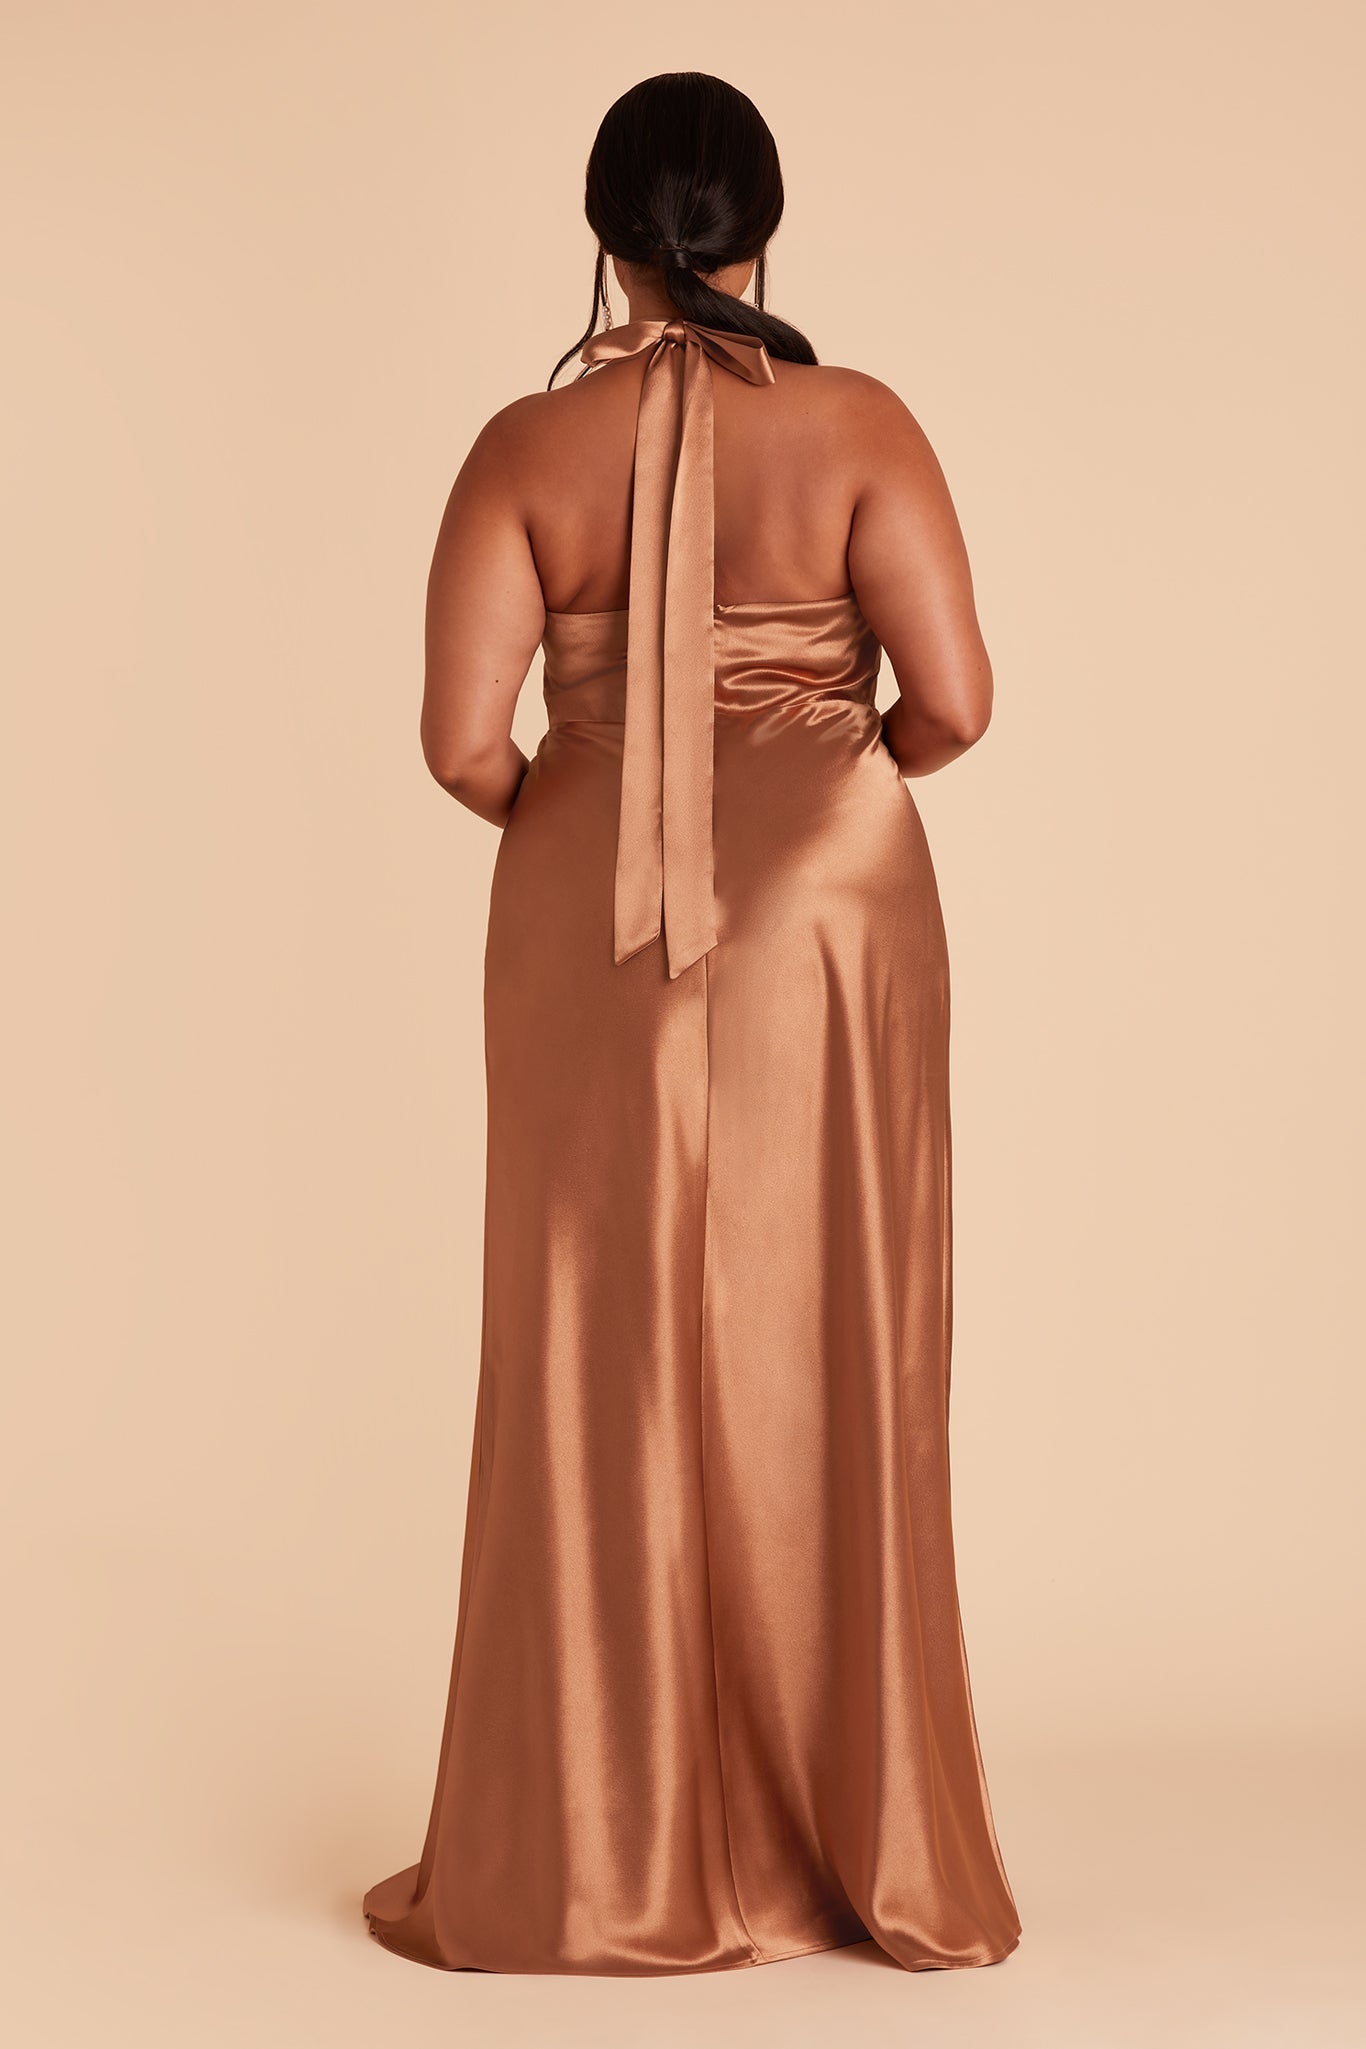 Monica plus size bridesmaid dress with slit in rust satin by Birdy Grey, back view